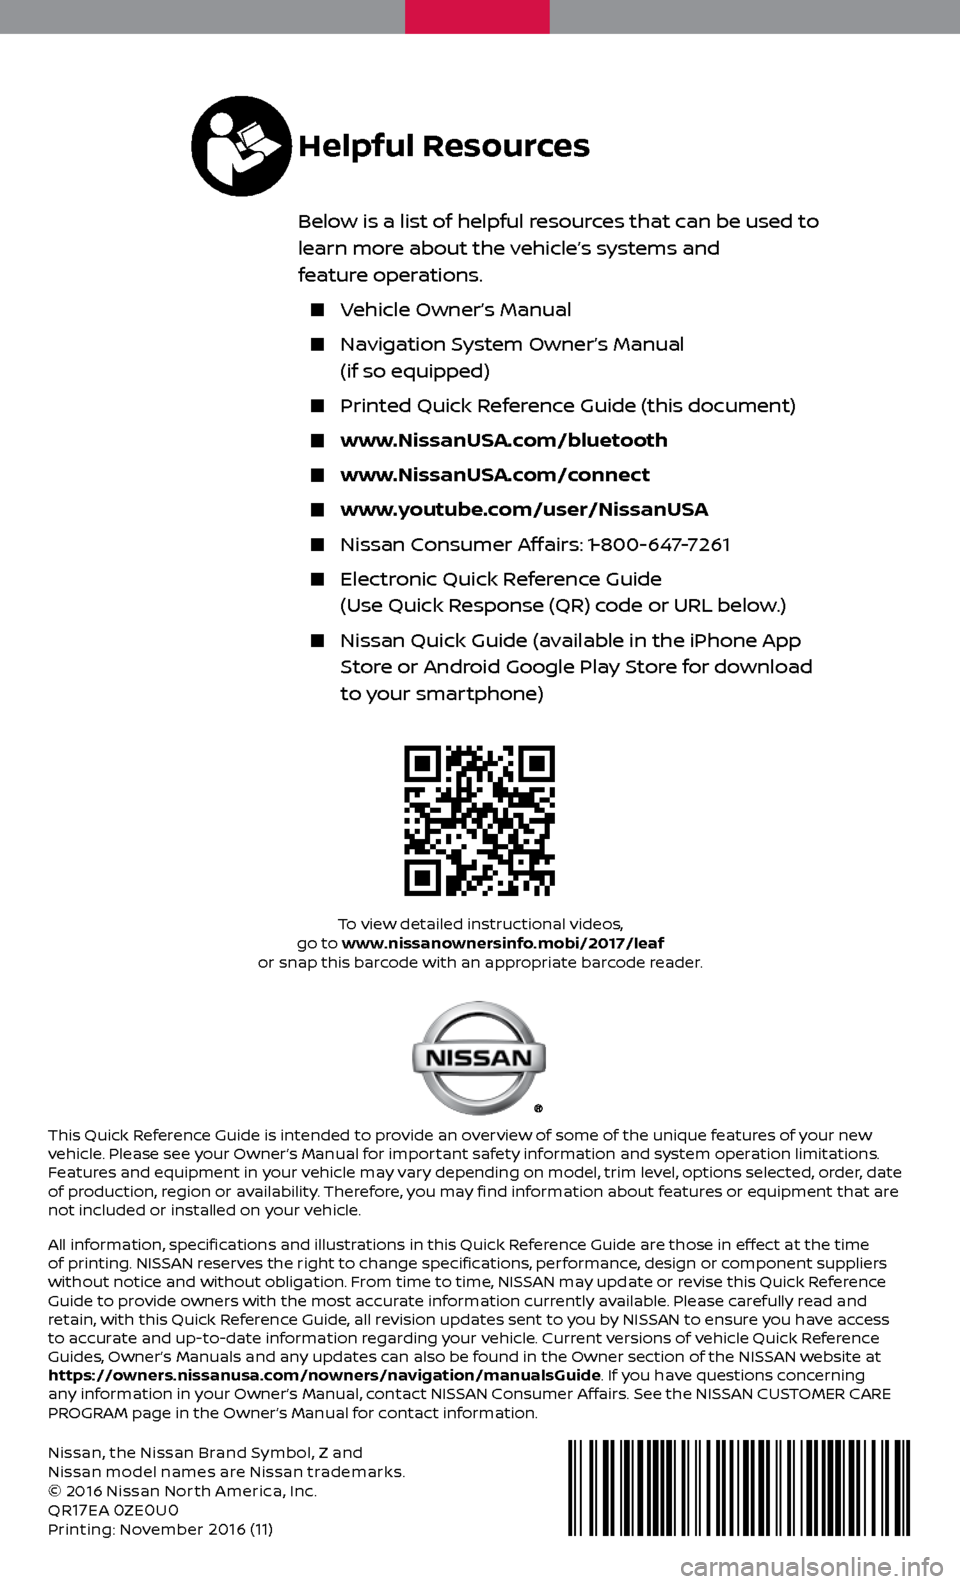 NISSAN LEAF 2017 1.G Quick Reference Guide Nissan, the Nissan Brand Symbol, Z and 
Nissan model names are Nissan trademarks.
© 2016 Nissan Nor th America, Inc.
QR
17EA 0ZE0U0Printing: November 2016 (11)
To view detailed instructional videos, 